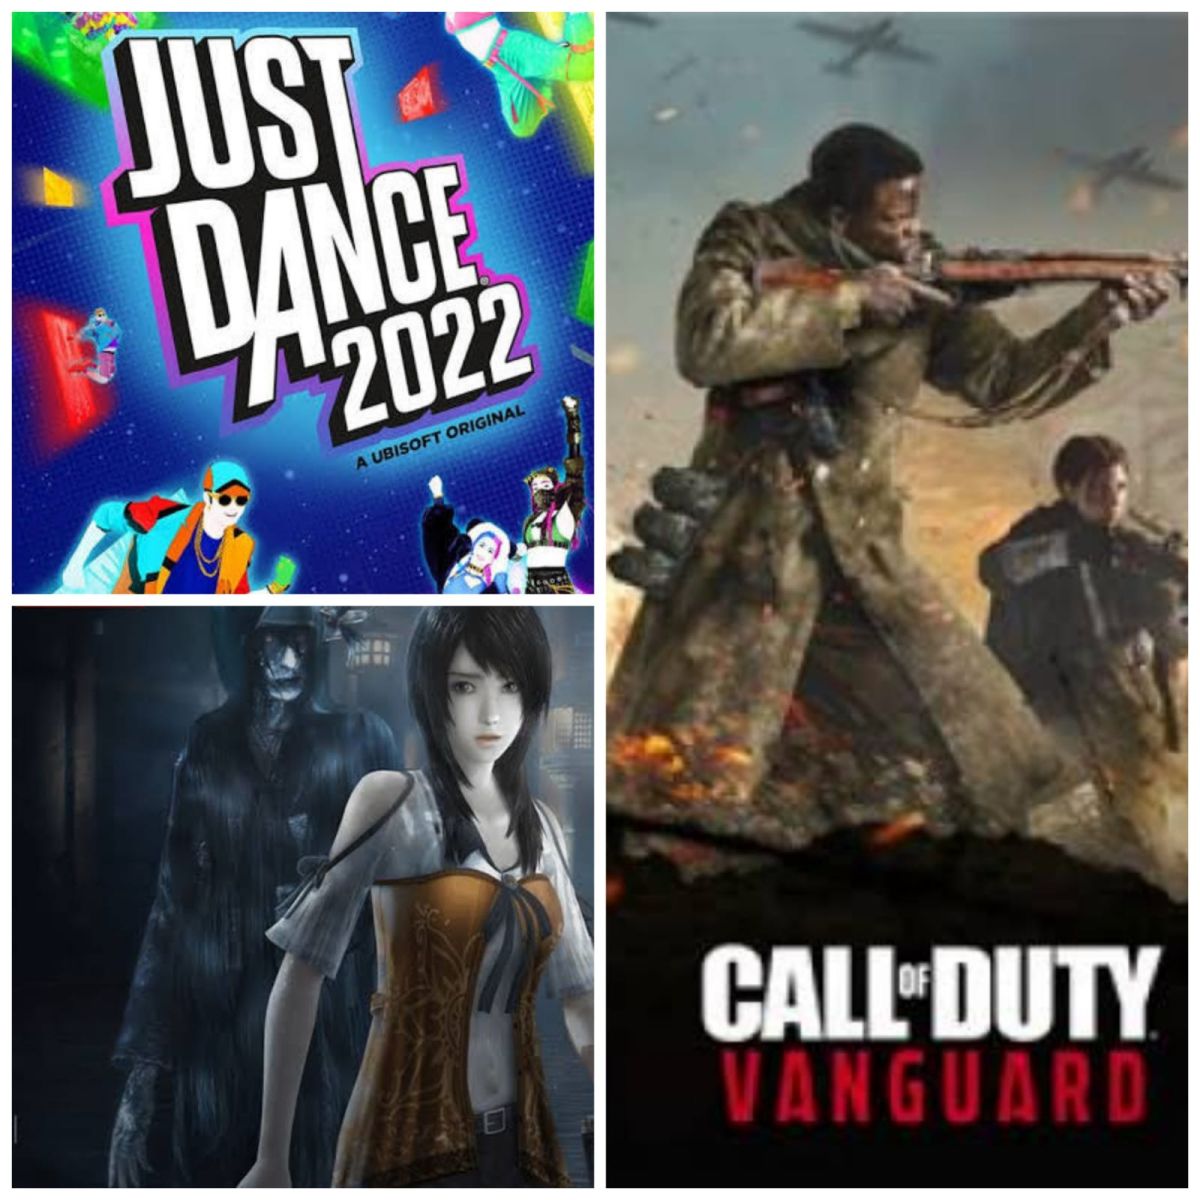 Review: Call of Duty: Vanguard;  Fatal Frame: Maiden of Black Water and Just Dance 2022